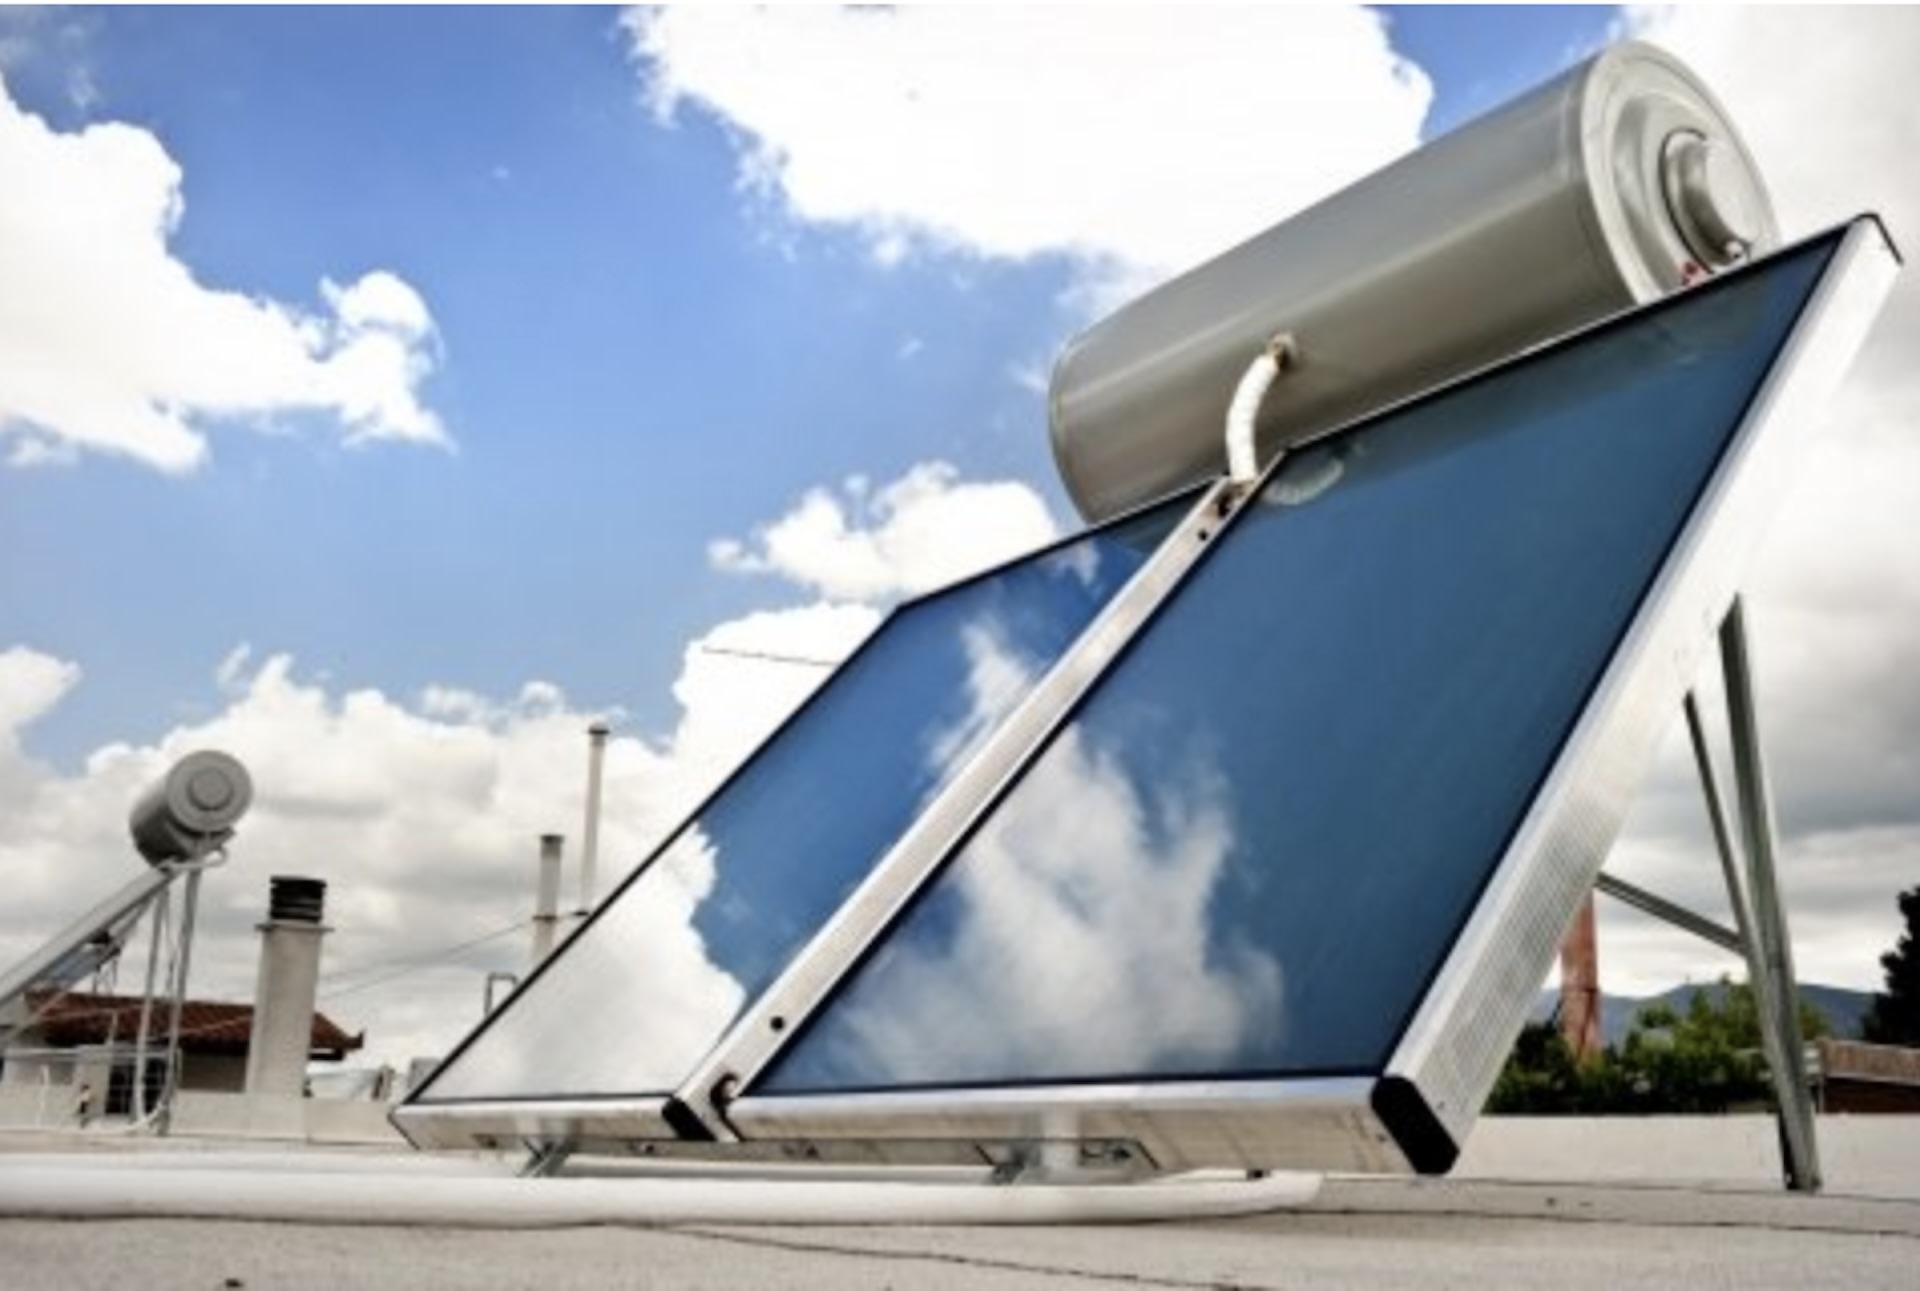 A Solar Water Heater Purchase Could Be Worth the Investment - CNET